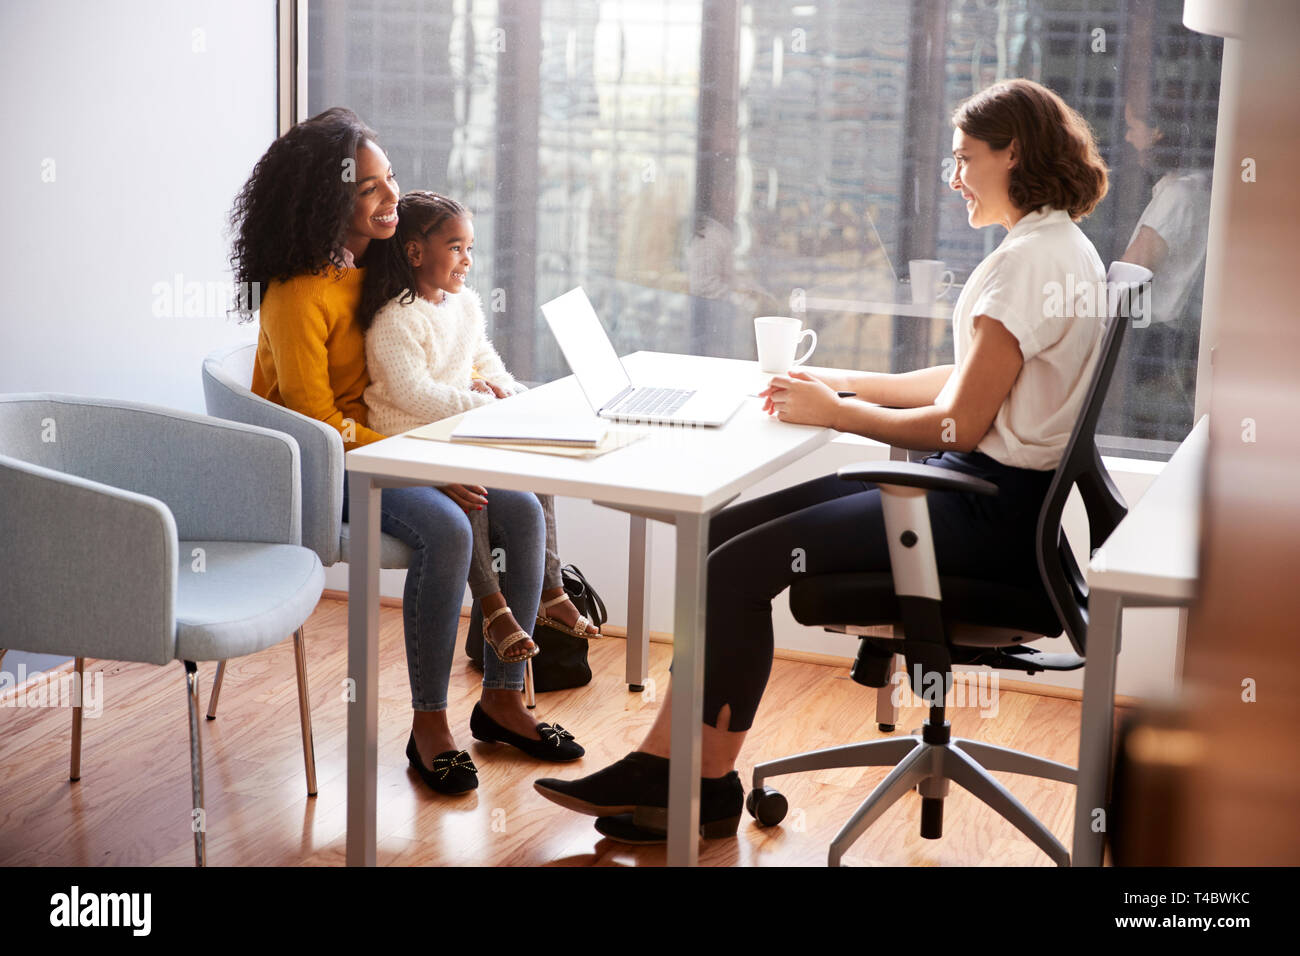 Mother And Daughter Having Consultation With Female Pediatrician In Hospital Office Stock Photo